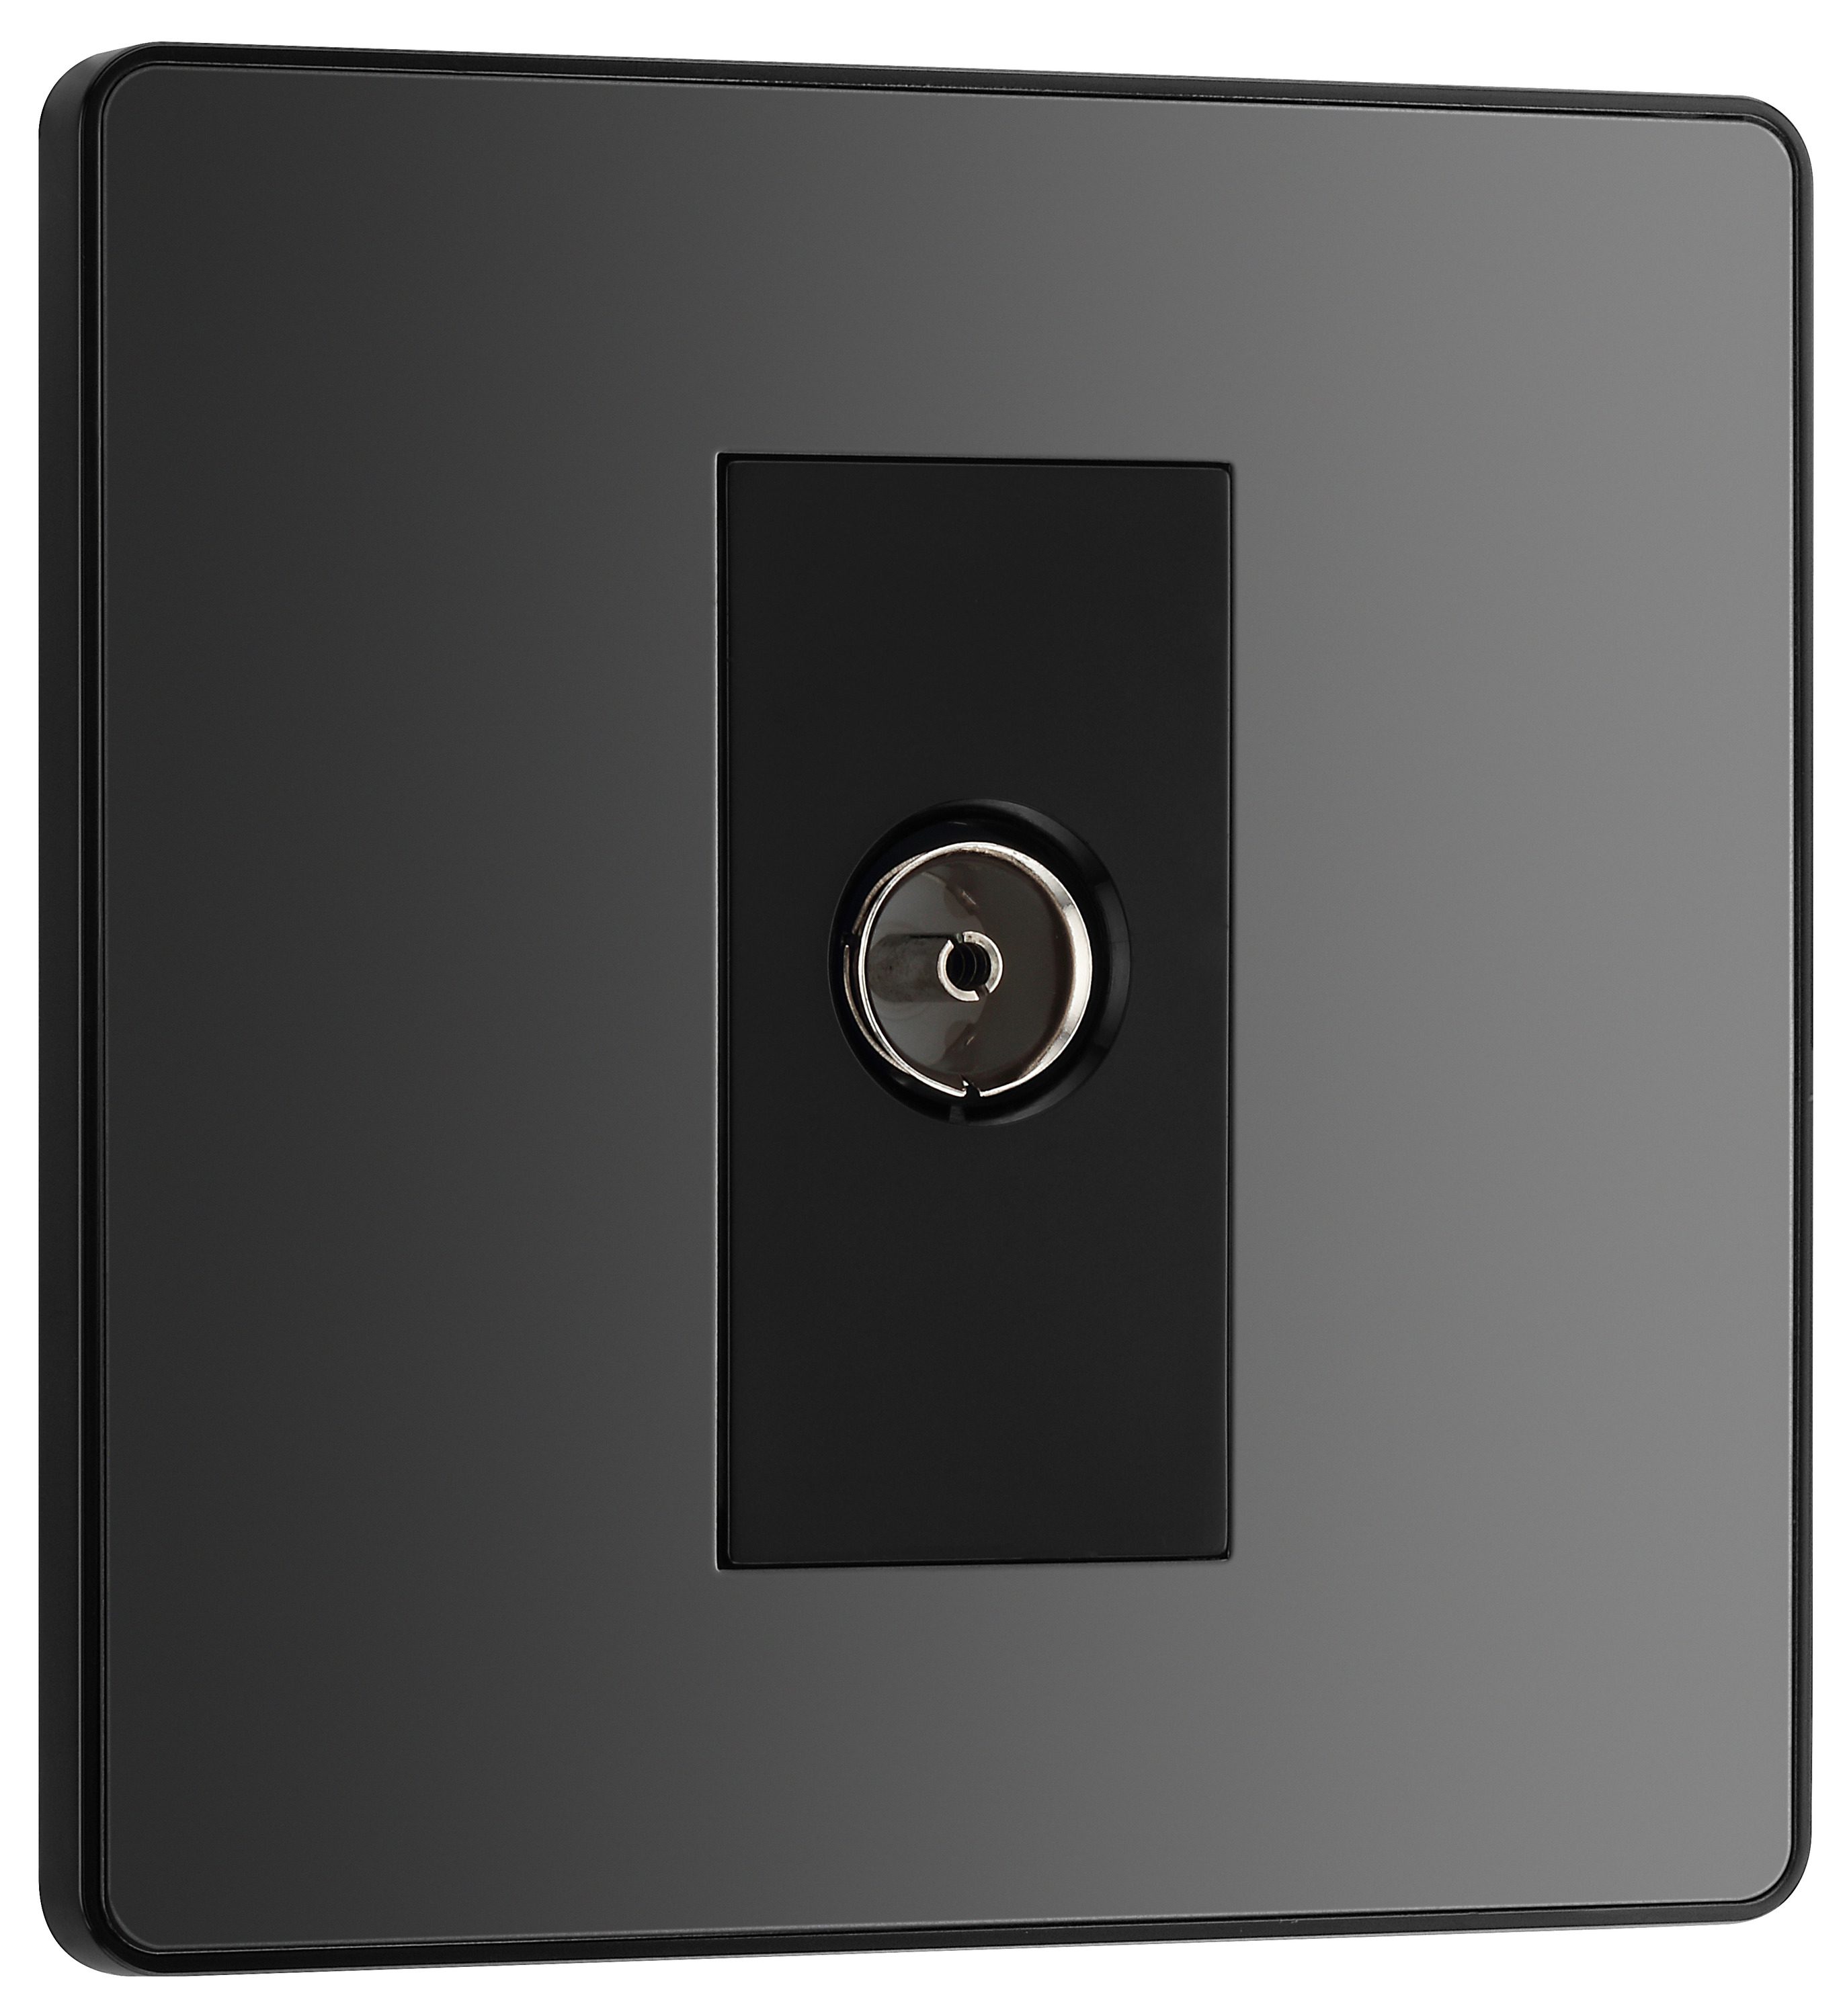 Image of BG Evolve Black Chrome Single Socket for TV & FM Co-Axial Aerial Connection